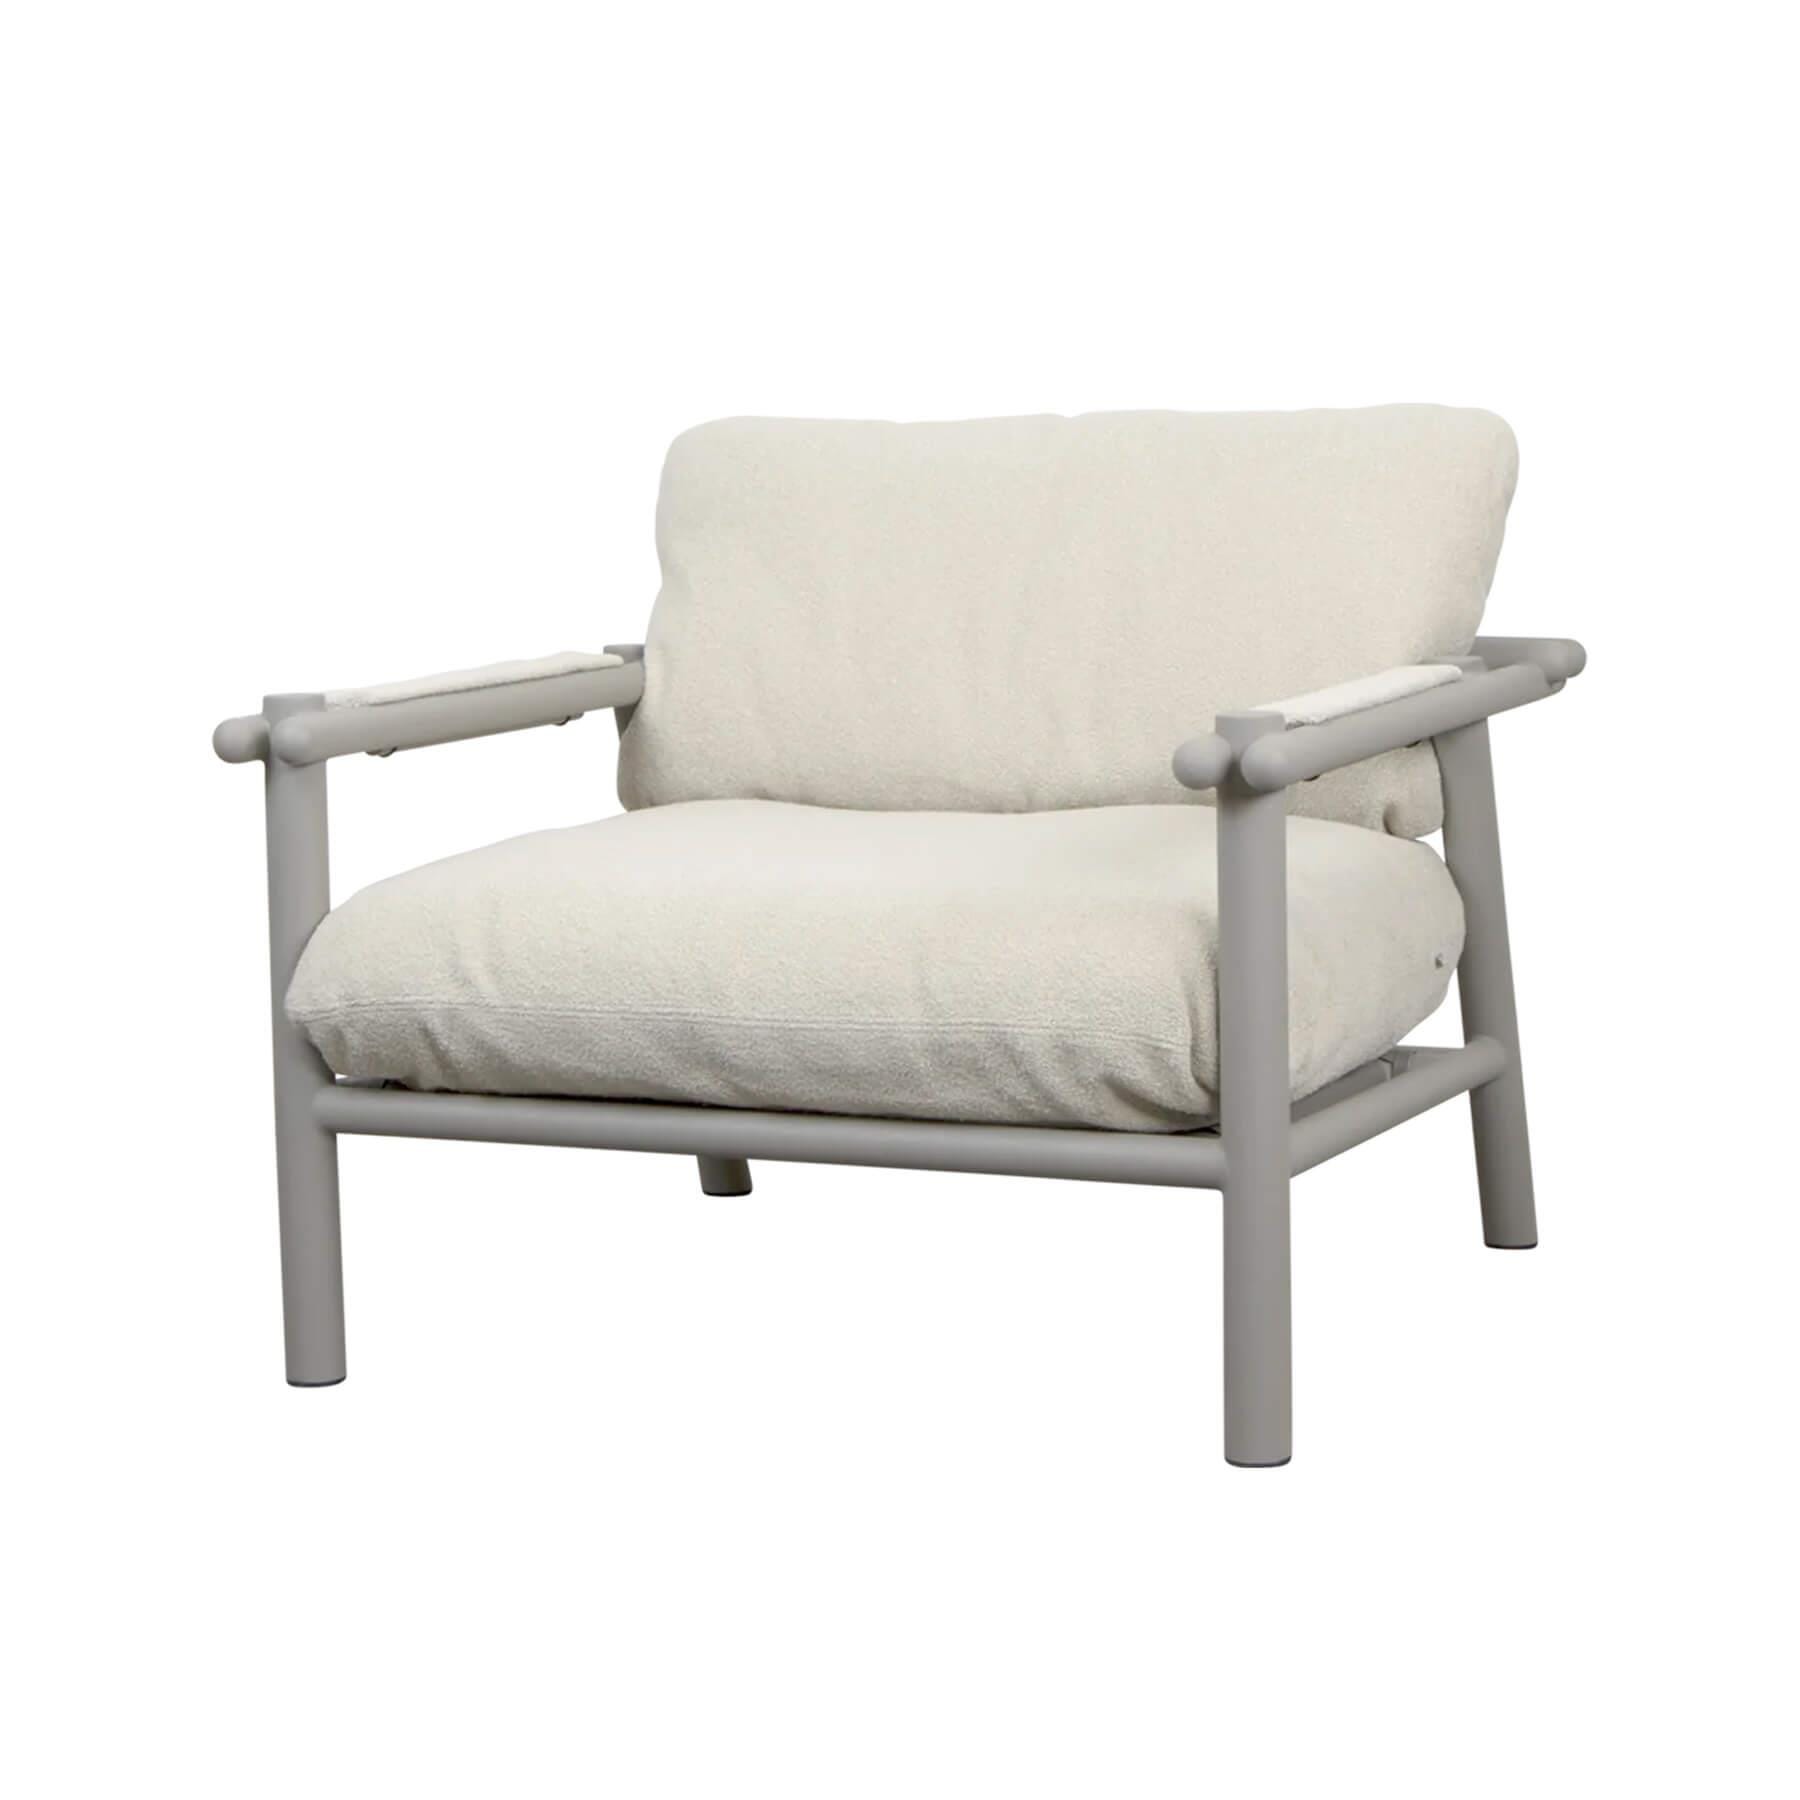 Caneline Sticks Outdoor Lounge Chair Taupe Sand Cushion Grey